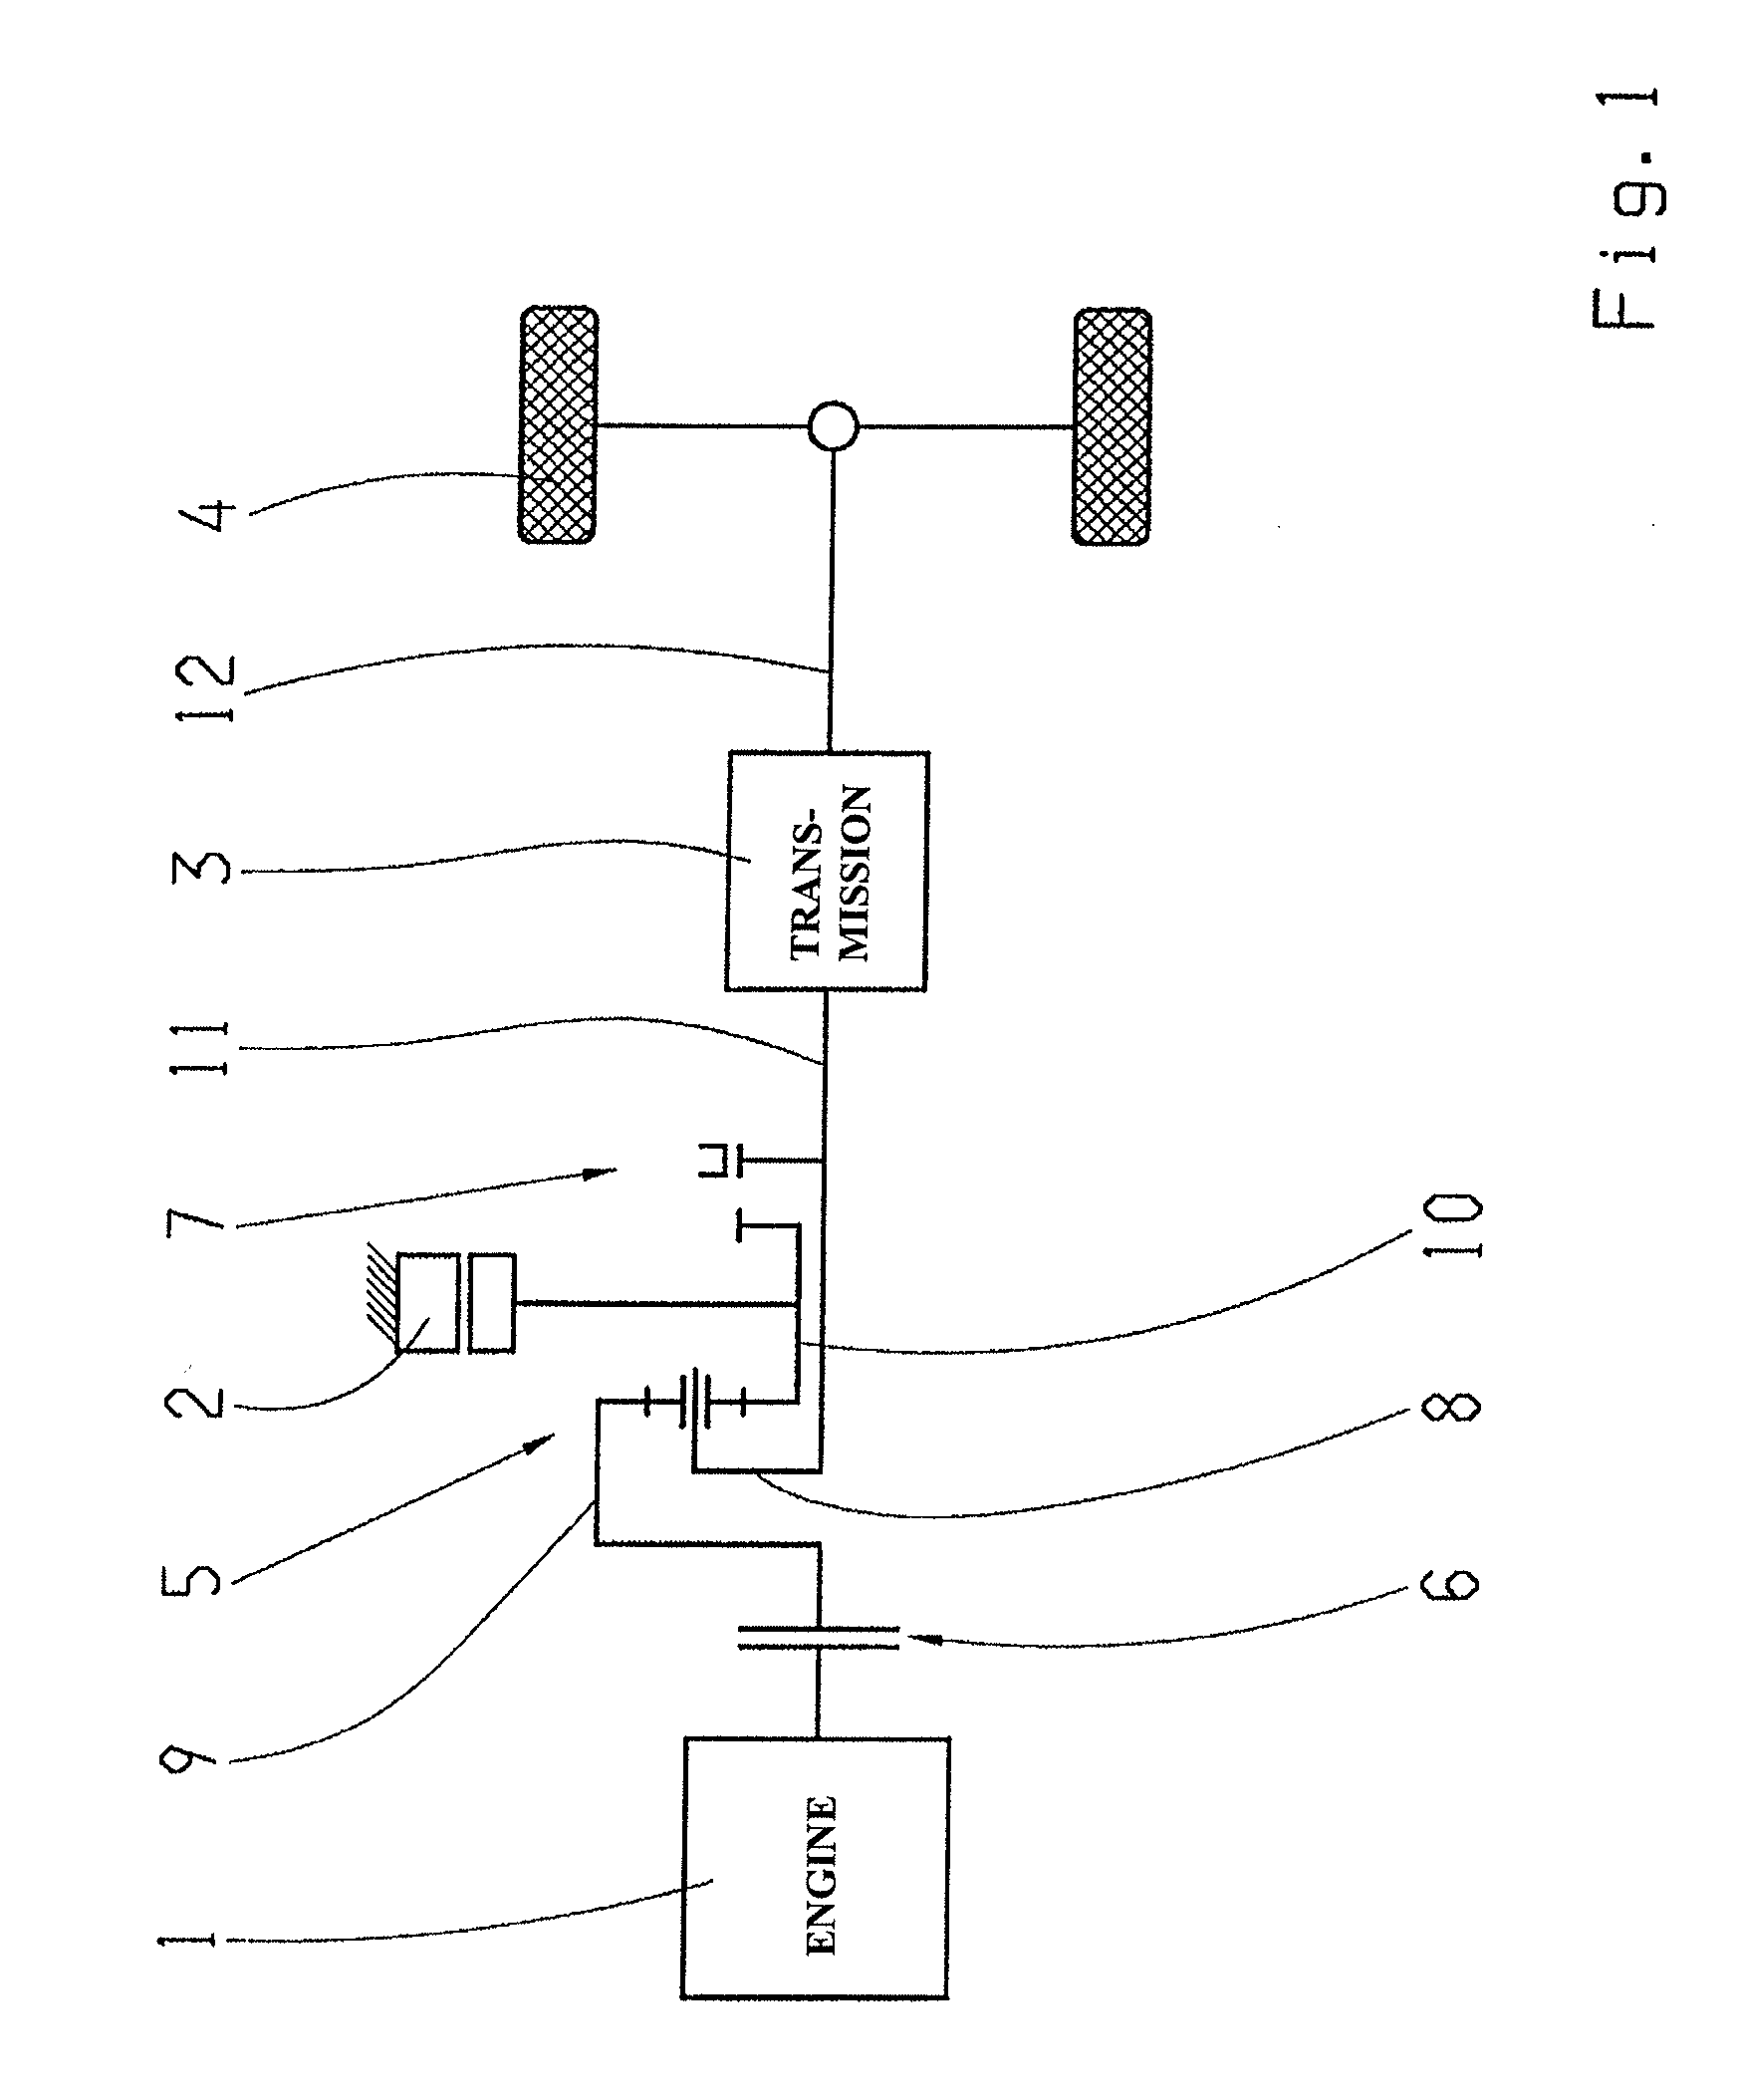 Method for operating a drive train of a hybrid vehicle